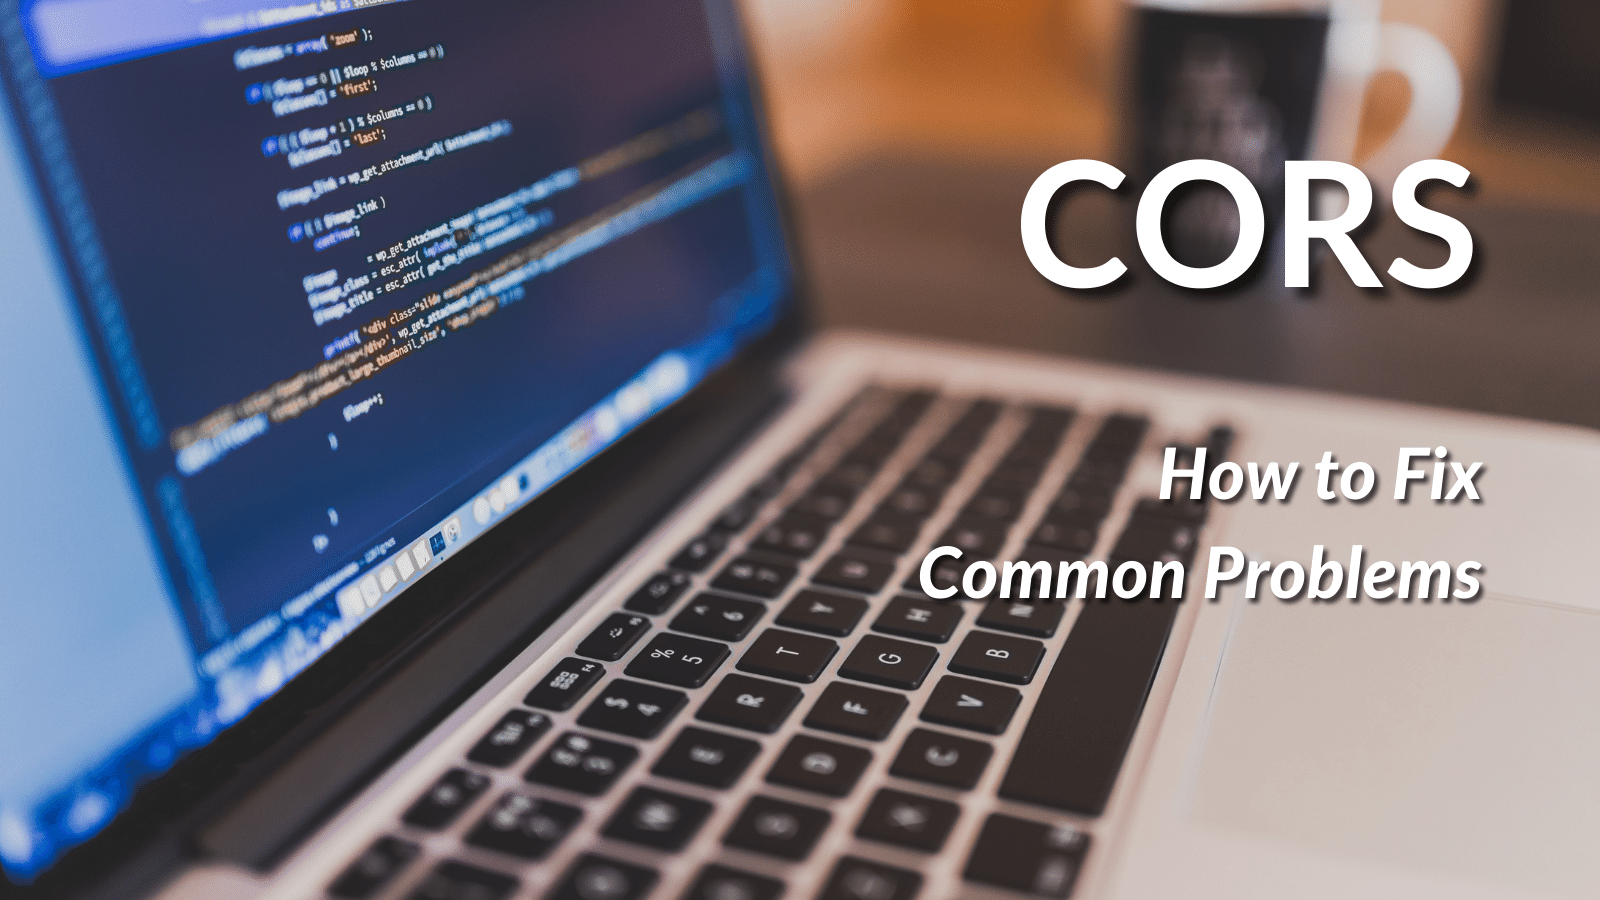 Fixing Common Problems with CORS and JavaScript